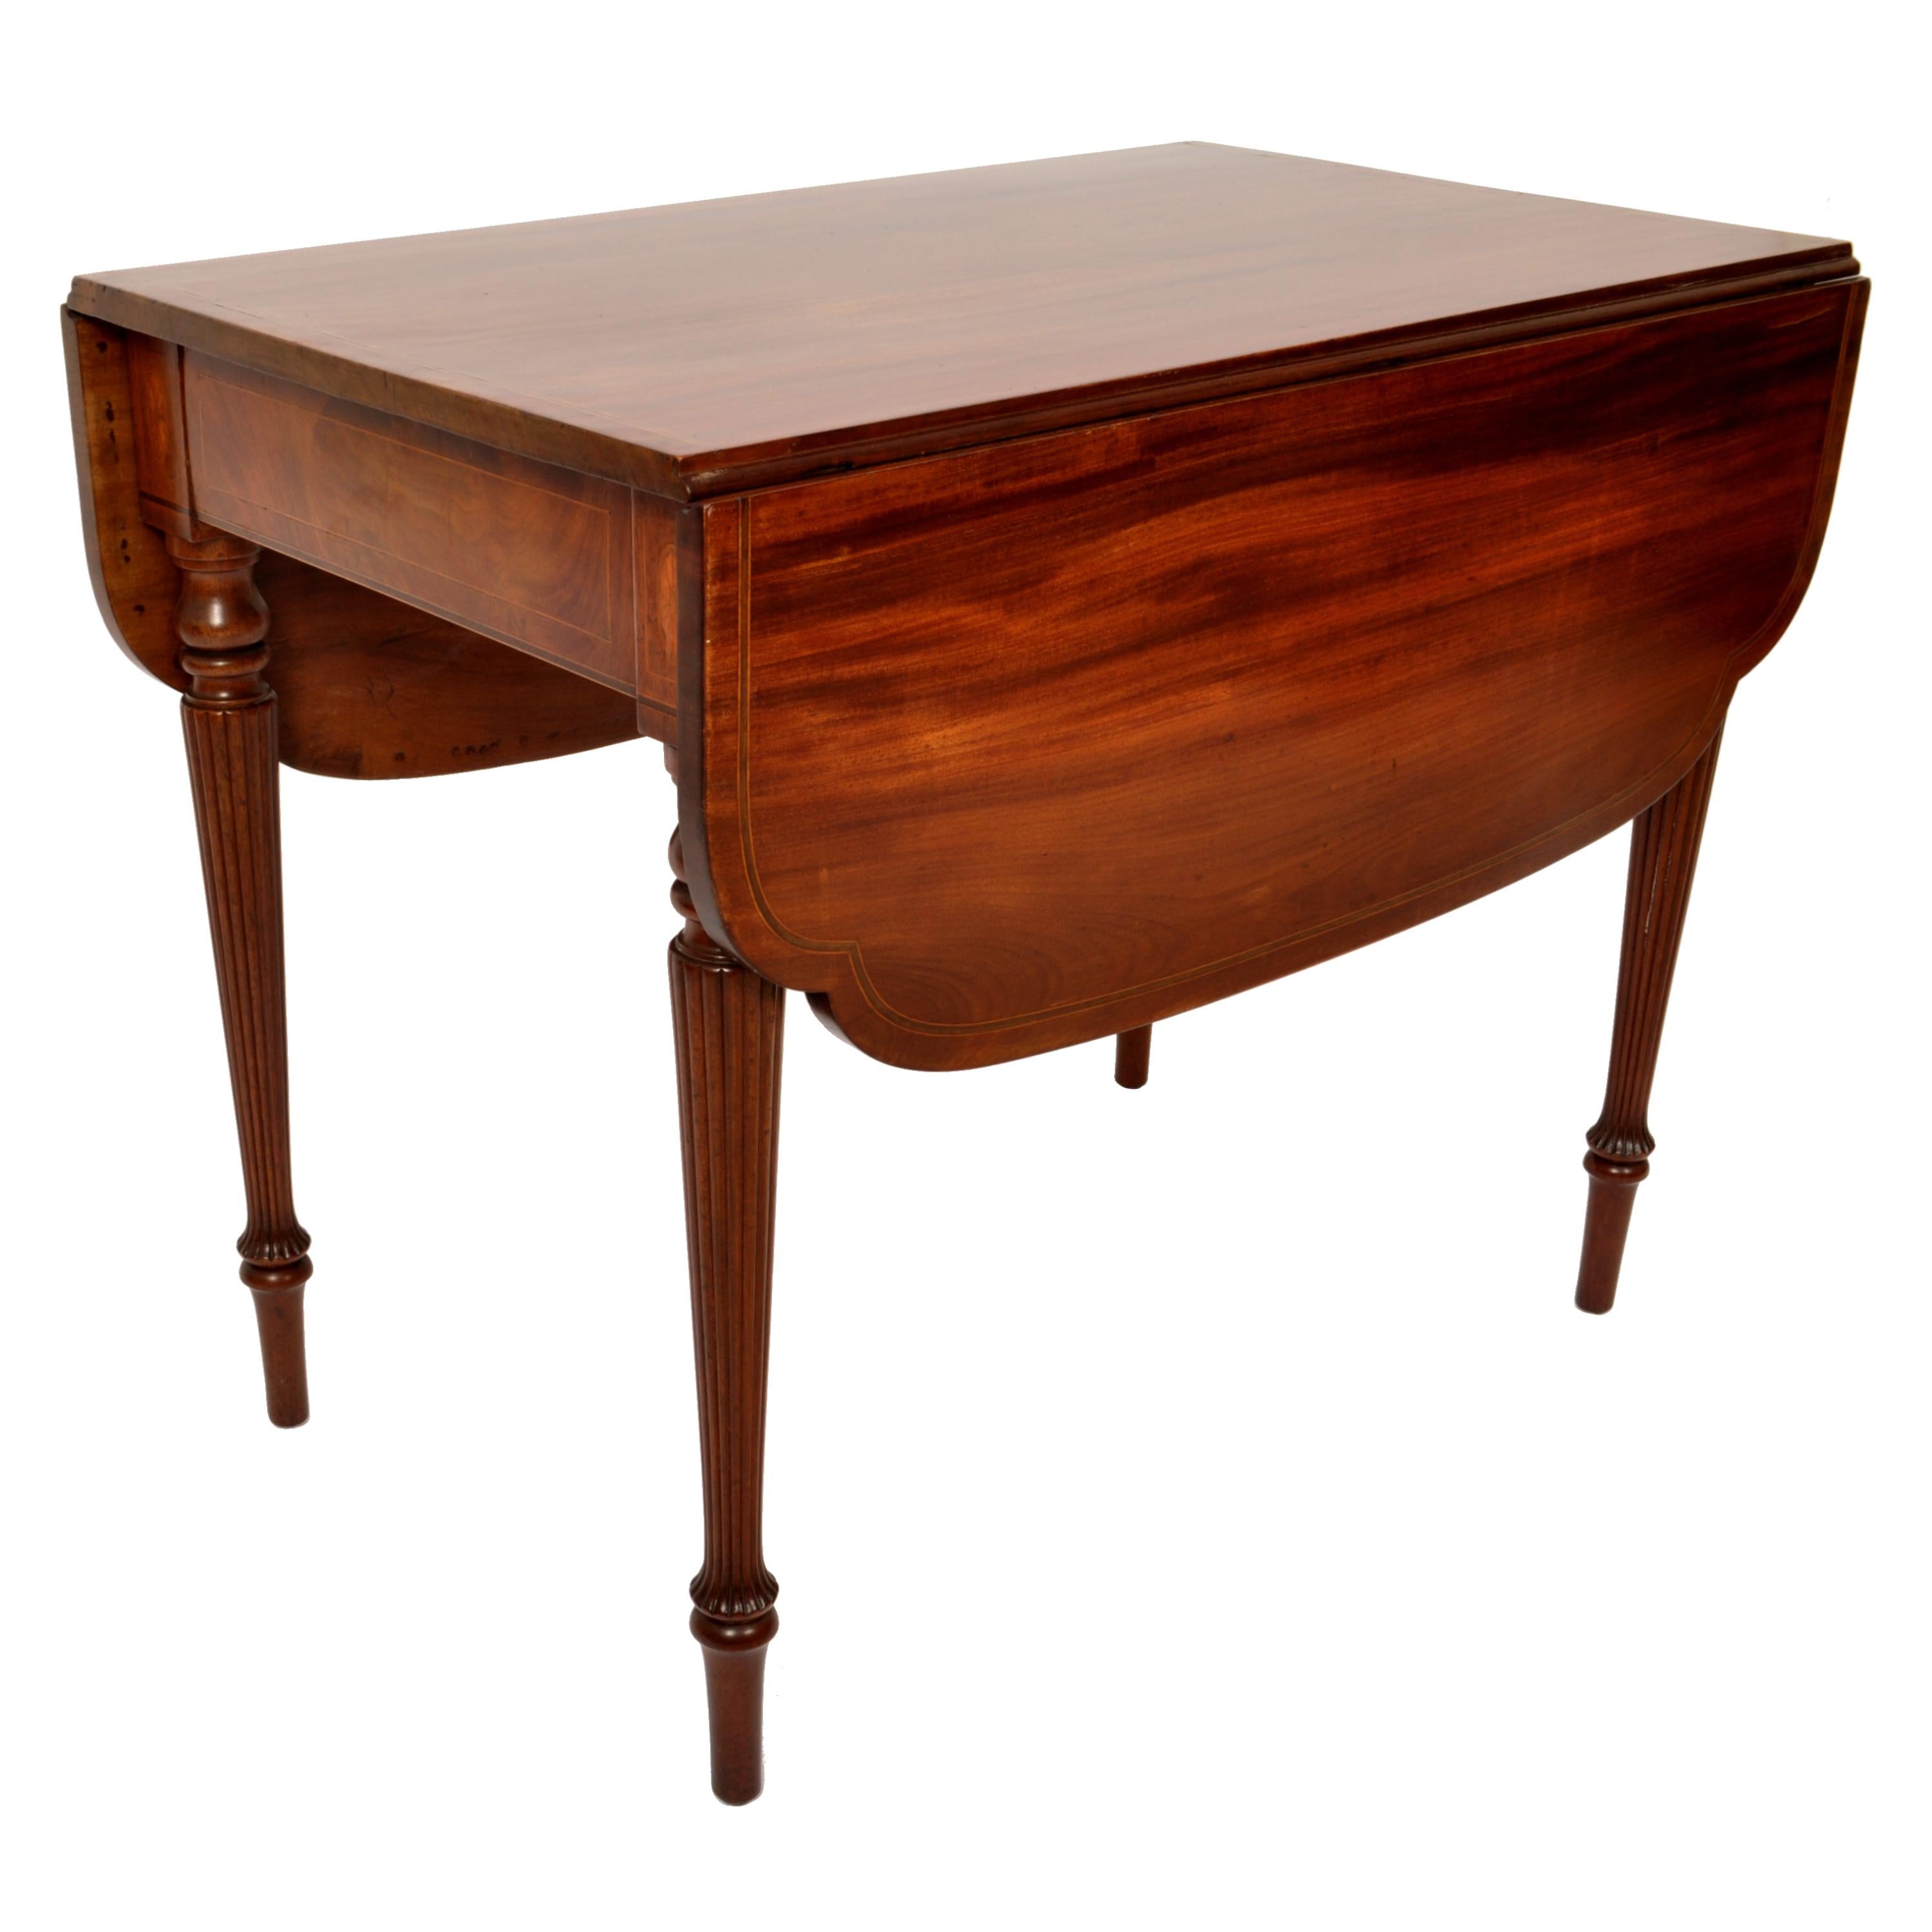 Antique American Federal Sheraton Inlaid Mahogany Pembroke Table New York 1790 For Sale 8